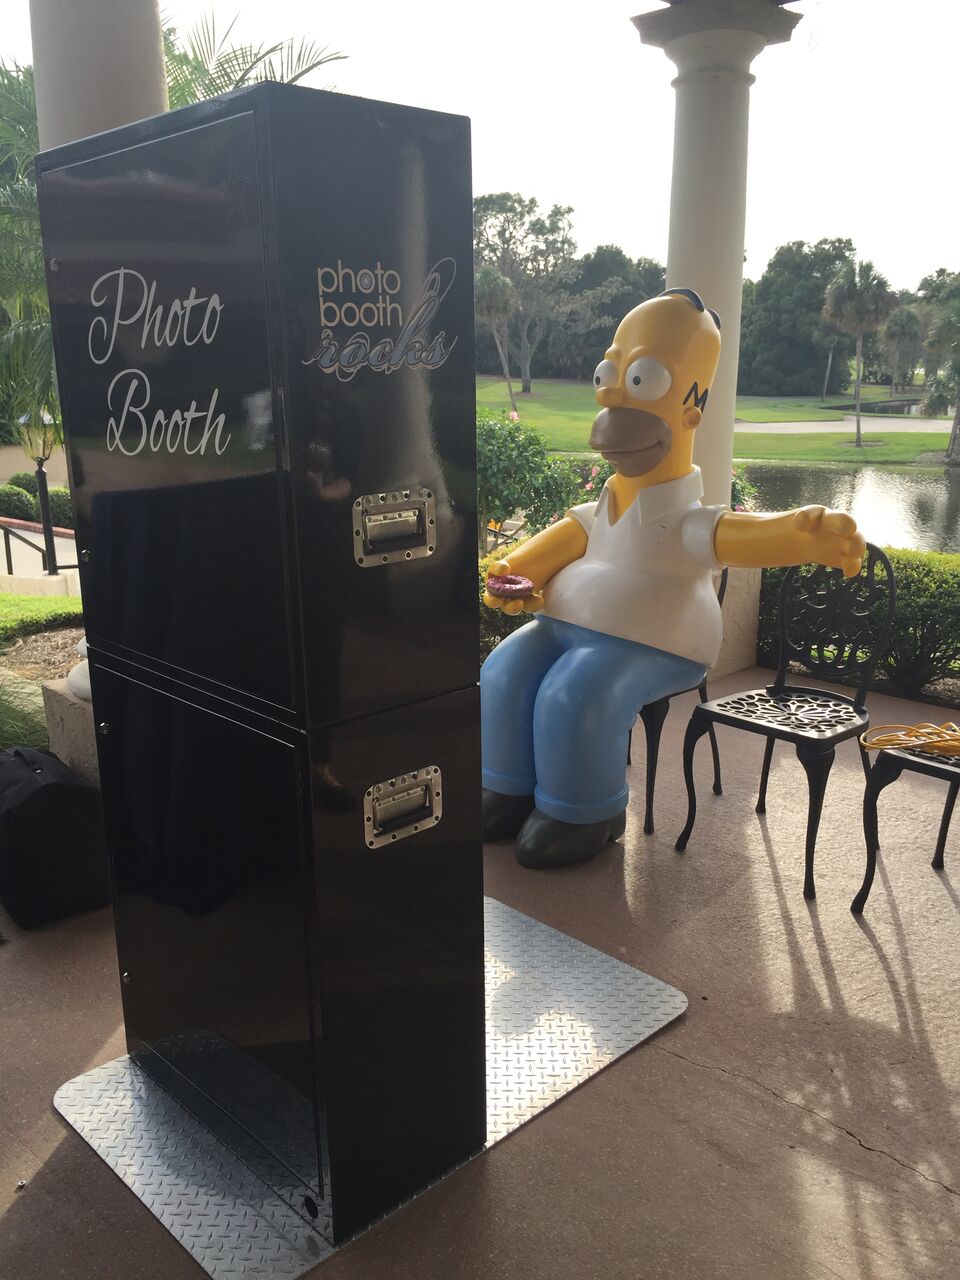 Black open air photo booth at Mission Inn Resort wedding with Homer Simpson prop